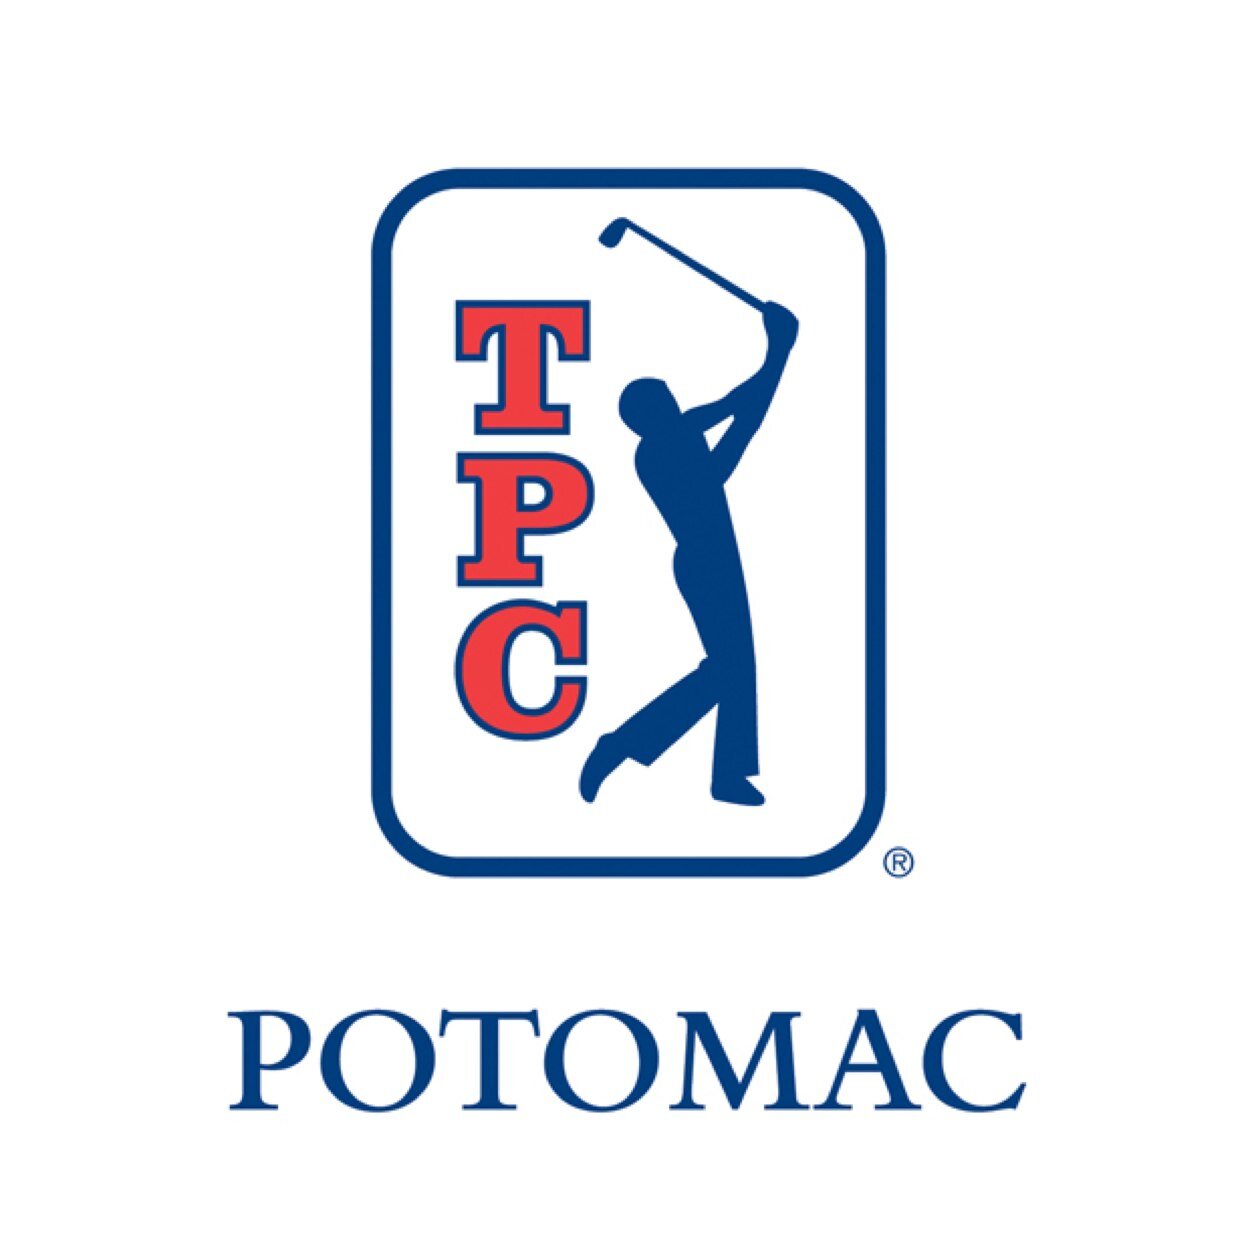 Agronomy updates from TPC Potomac at Avenel Farm.  Host of 26 professional tournaments since 1986.